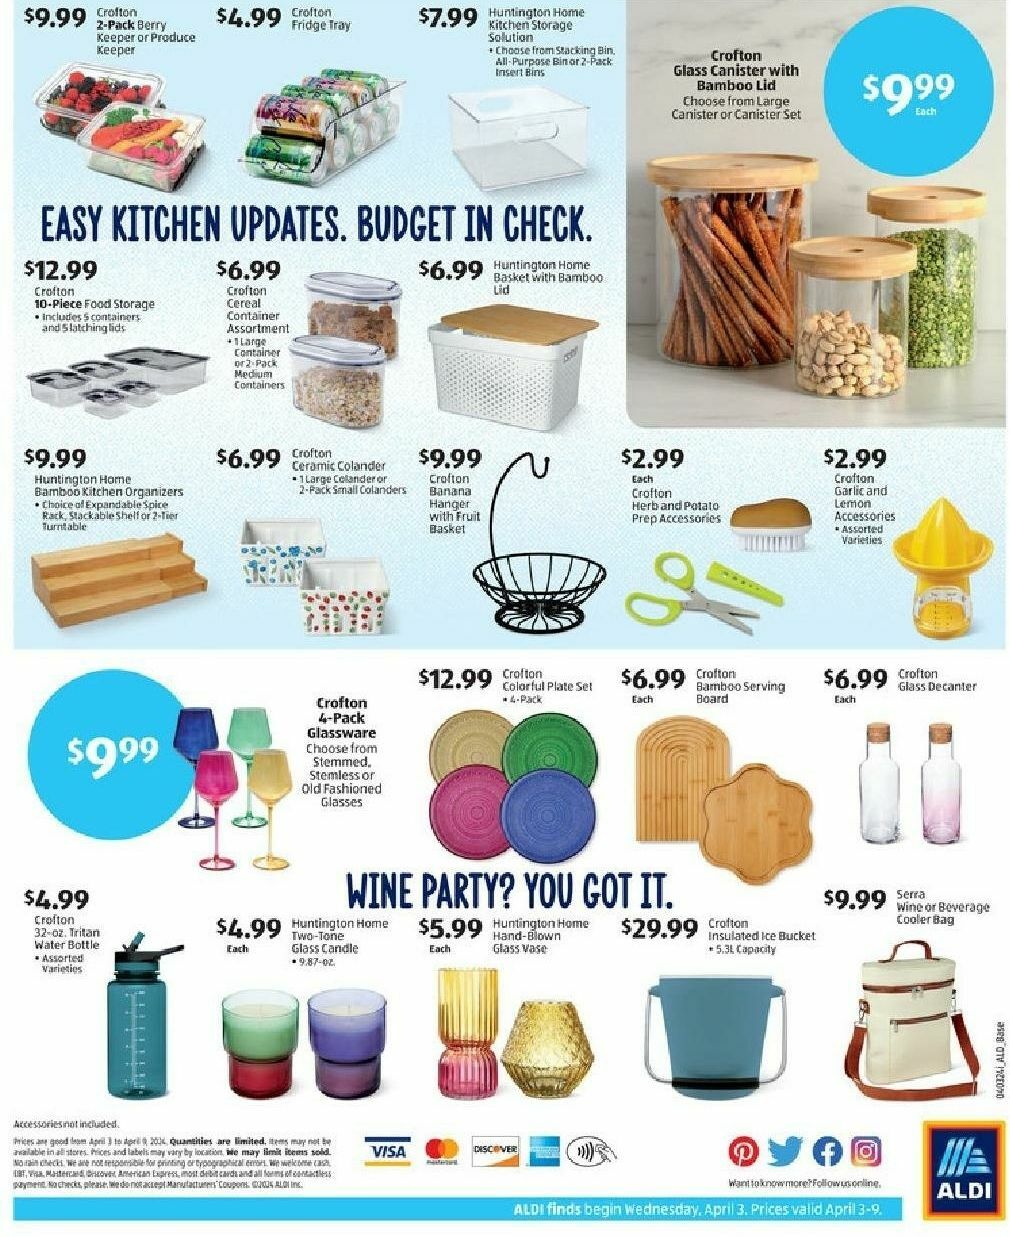 ALDI Weekly Ad from April 3